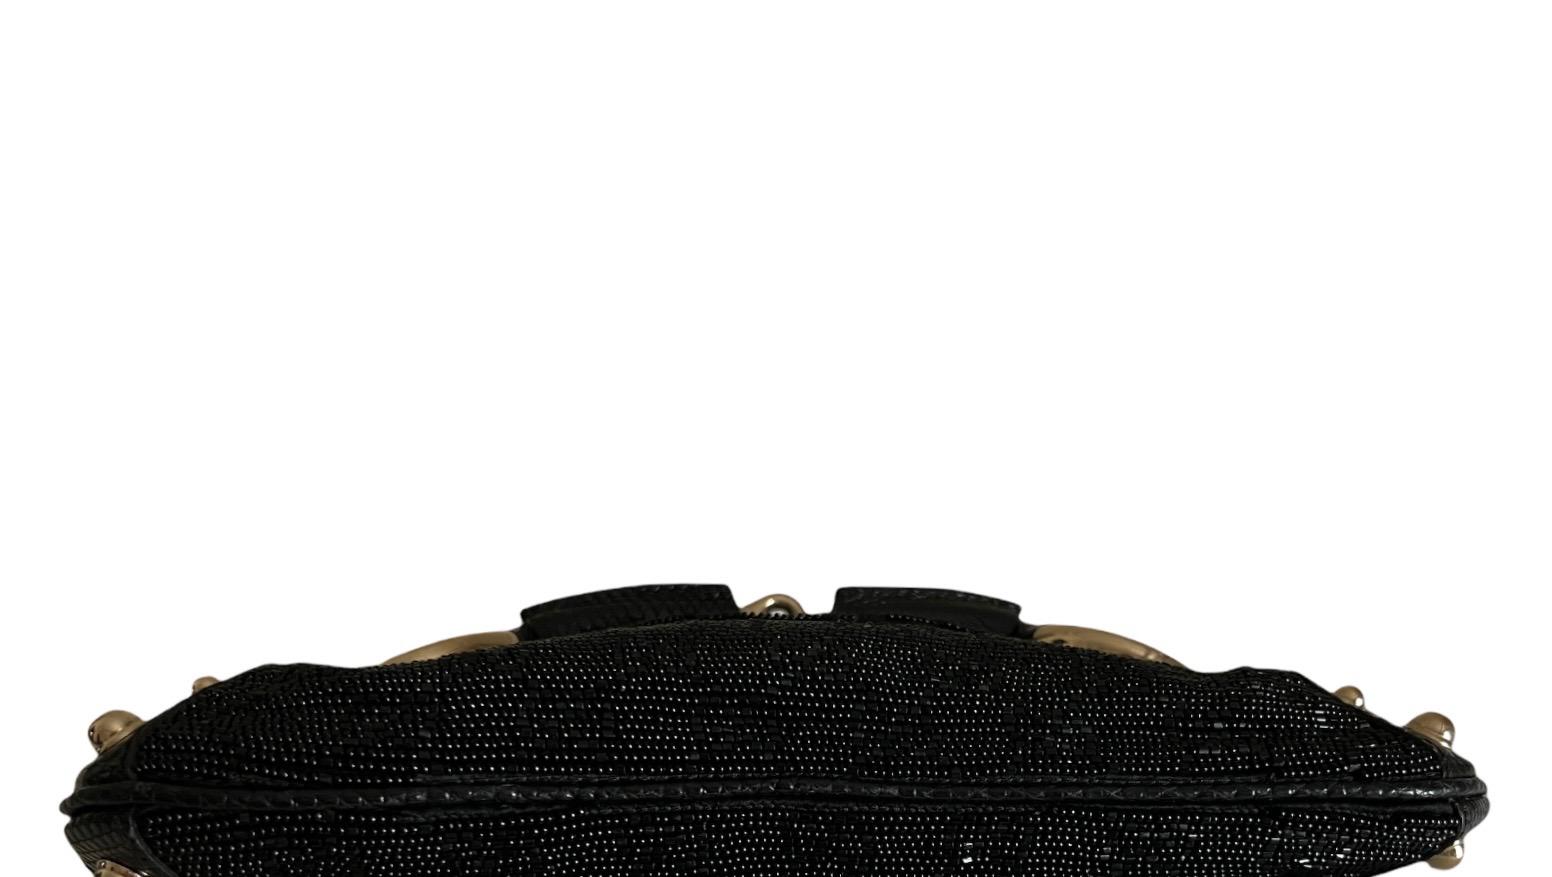 Gucci Tom Ford Black Monogram Beaded Crystal Lizard Bamboo Horsebit Clutch Bag In Good Condition For Sale In Switzerland, CH